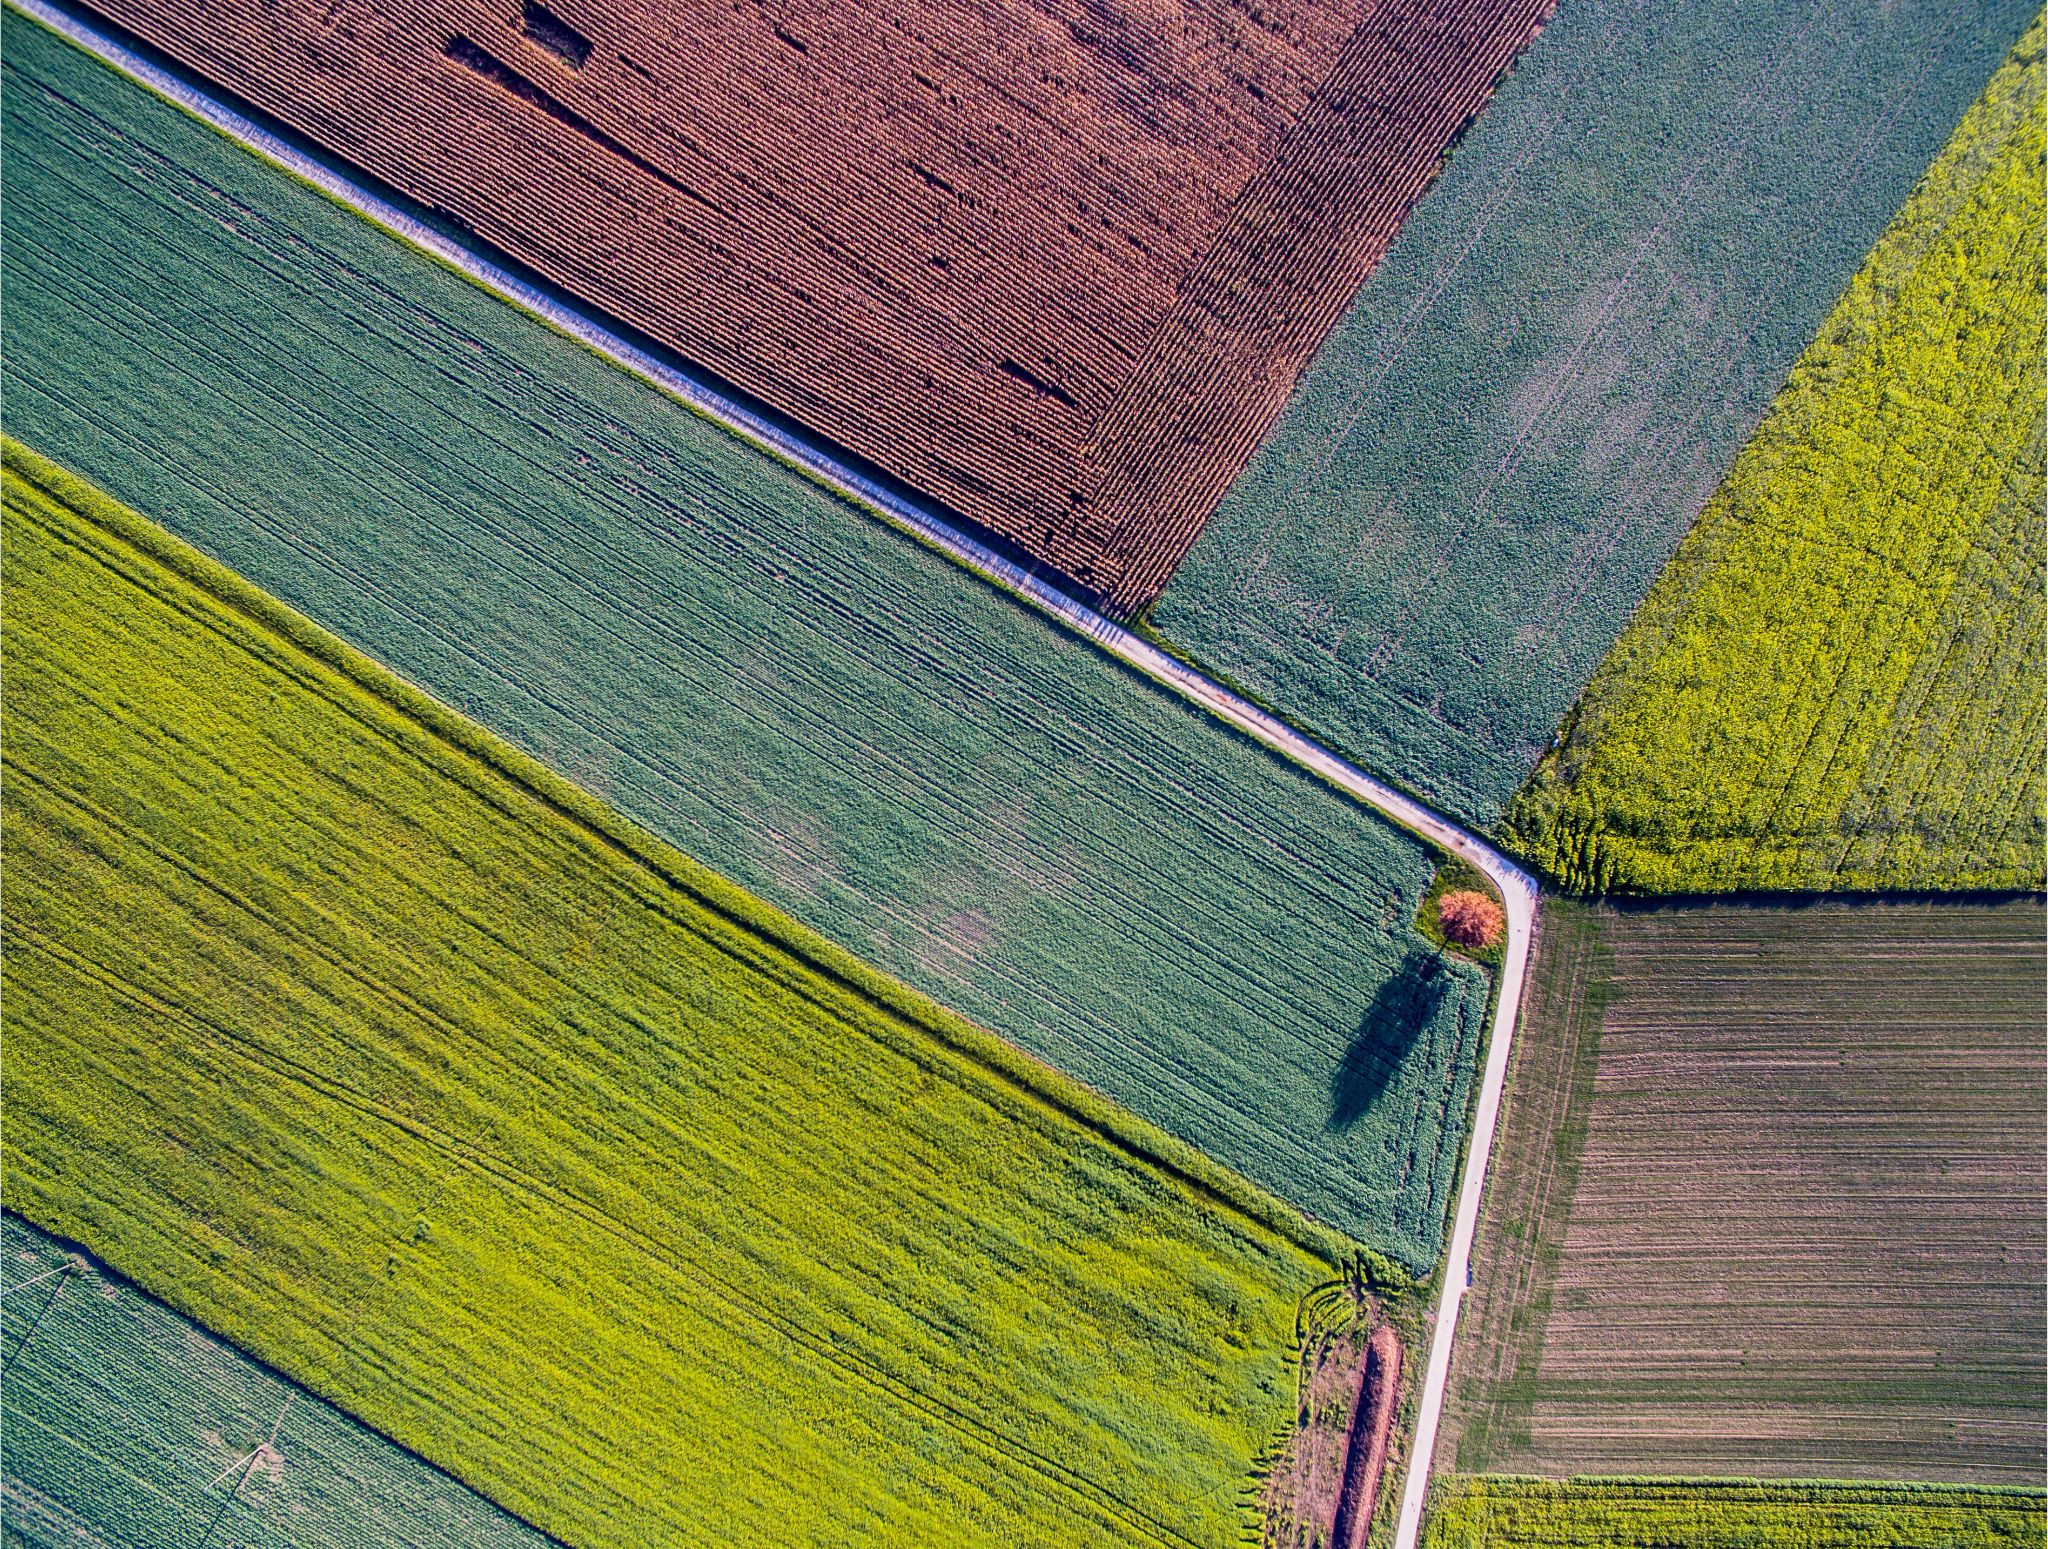 Aerial image of farm in US